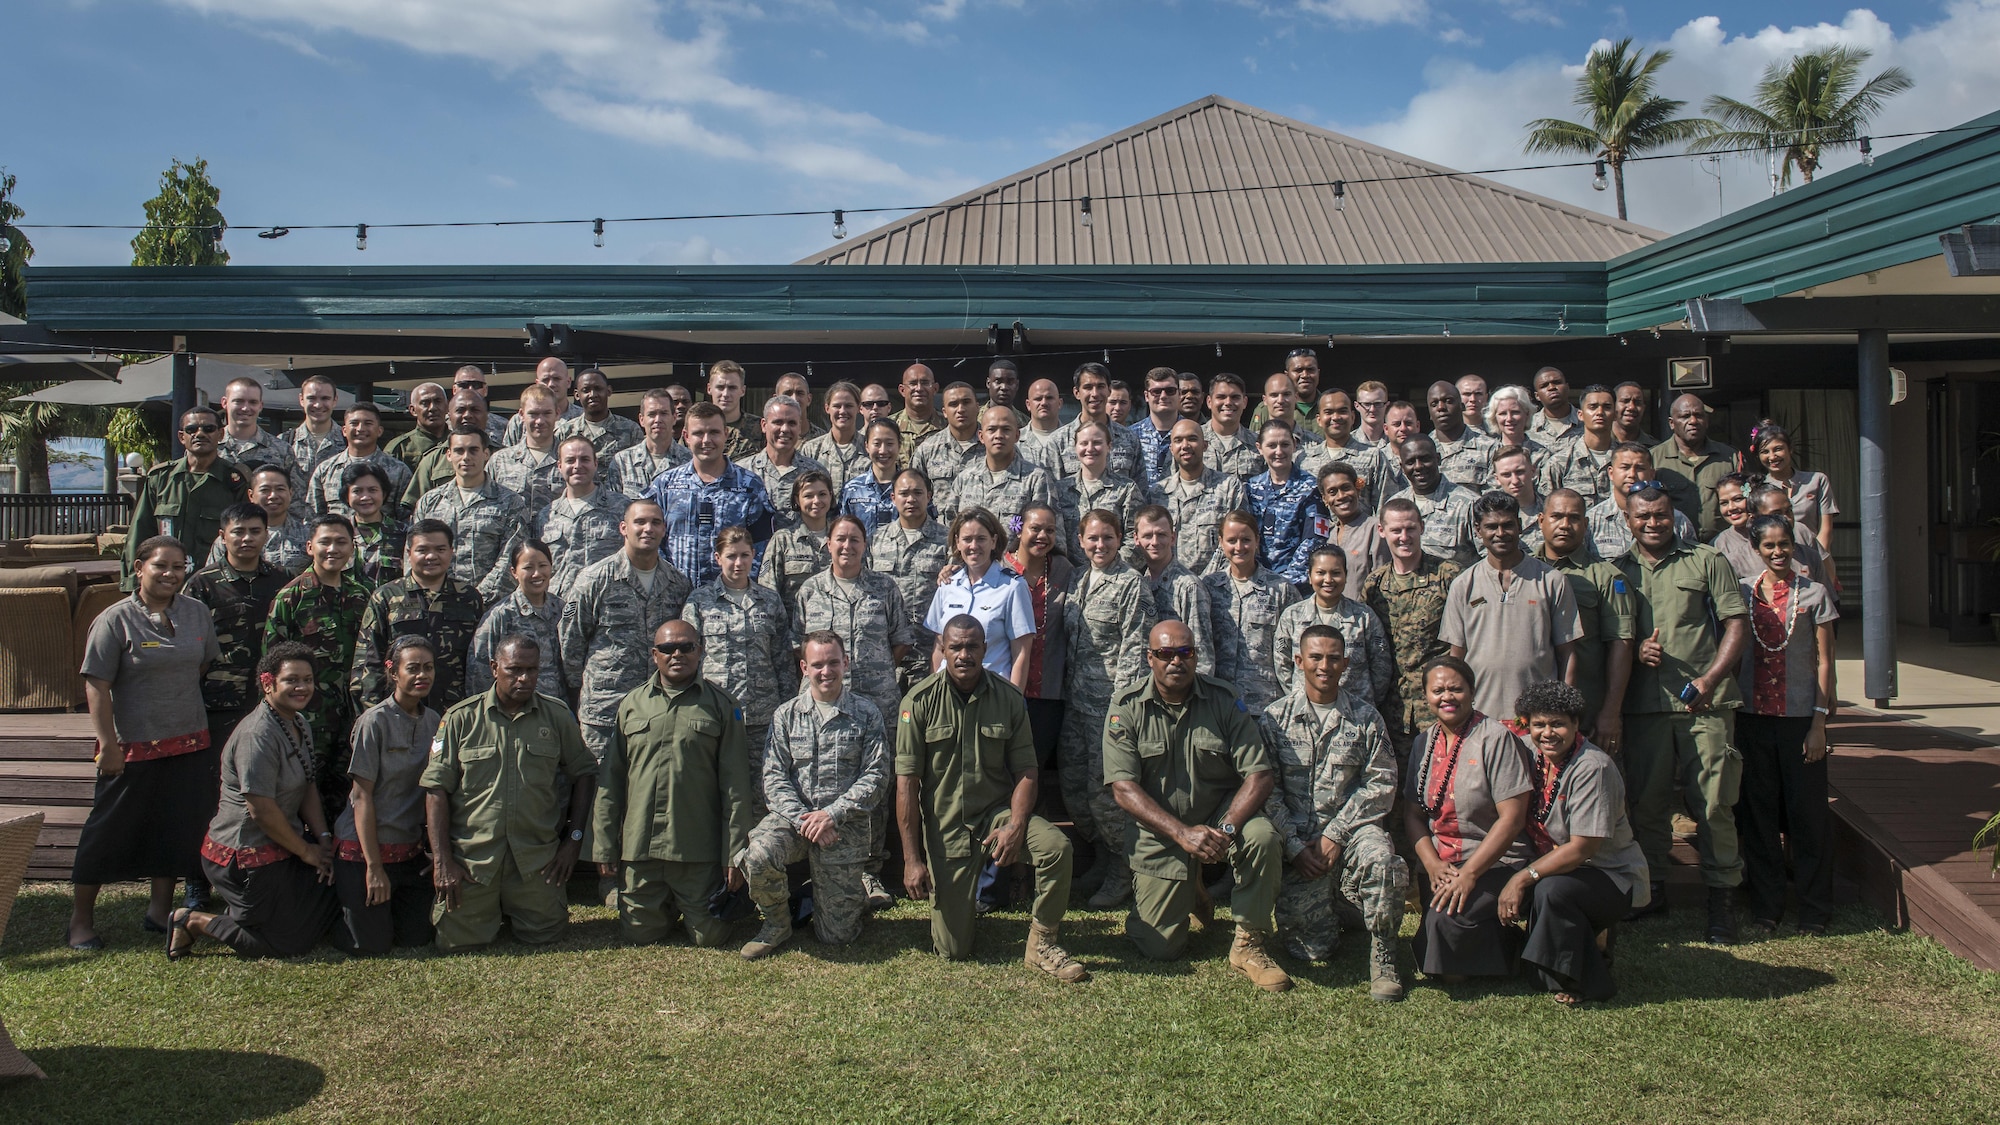 Members of the Pacific Angel 17-3 (PACANGEL) team pose for a photo in Lautoka, Fiji, July 24, 2017. The team consisted of service members from five partnering nations aside from the U.S. and Republic of Fiji including Australia, Vanuatu, Indonesia, the Philippines and France. The nations all offered their assistance in the exercise promoting regional military-civilian-nongovernmental organization cooperation and interoperability across the Indo-Asia-Pacific region. The hotel staff joined in the photo as their support for the service members staying at their hotel ensured the PACANGEL 17-3 personnel were well rested, fed and relaxed when caring for their fellow countrymen whether at the health services site or on engineering projects. (U.S. Air Force photo/Tech. Sgt. Benjamin W. Stratton)